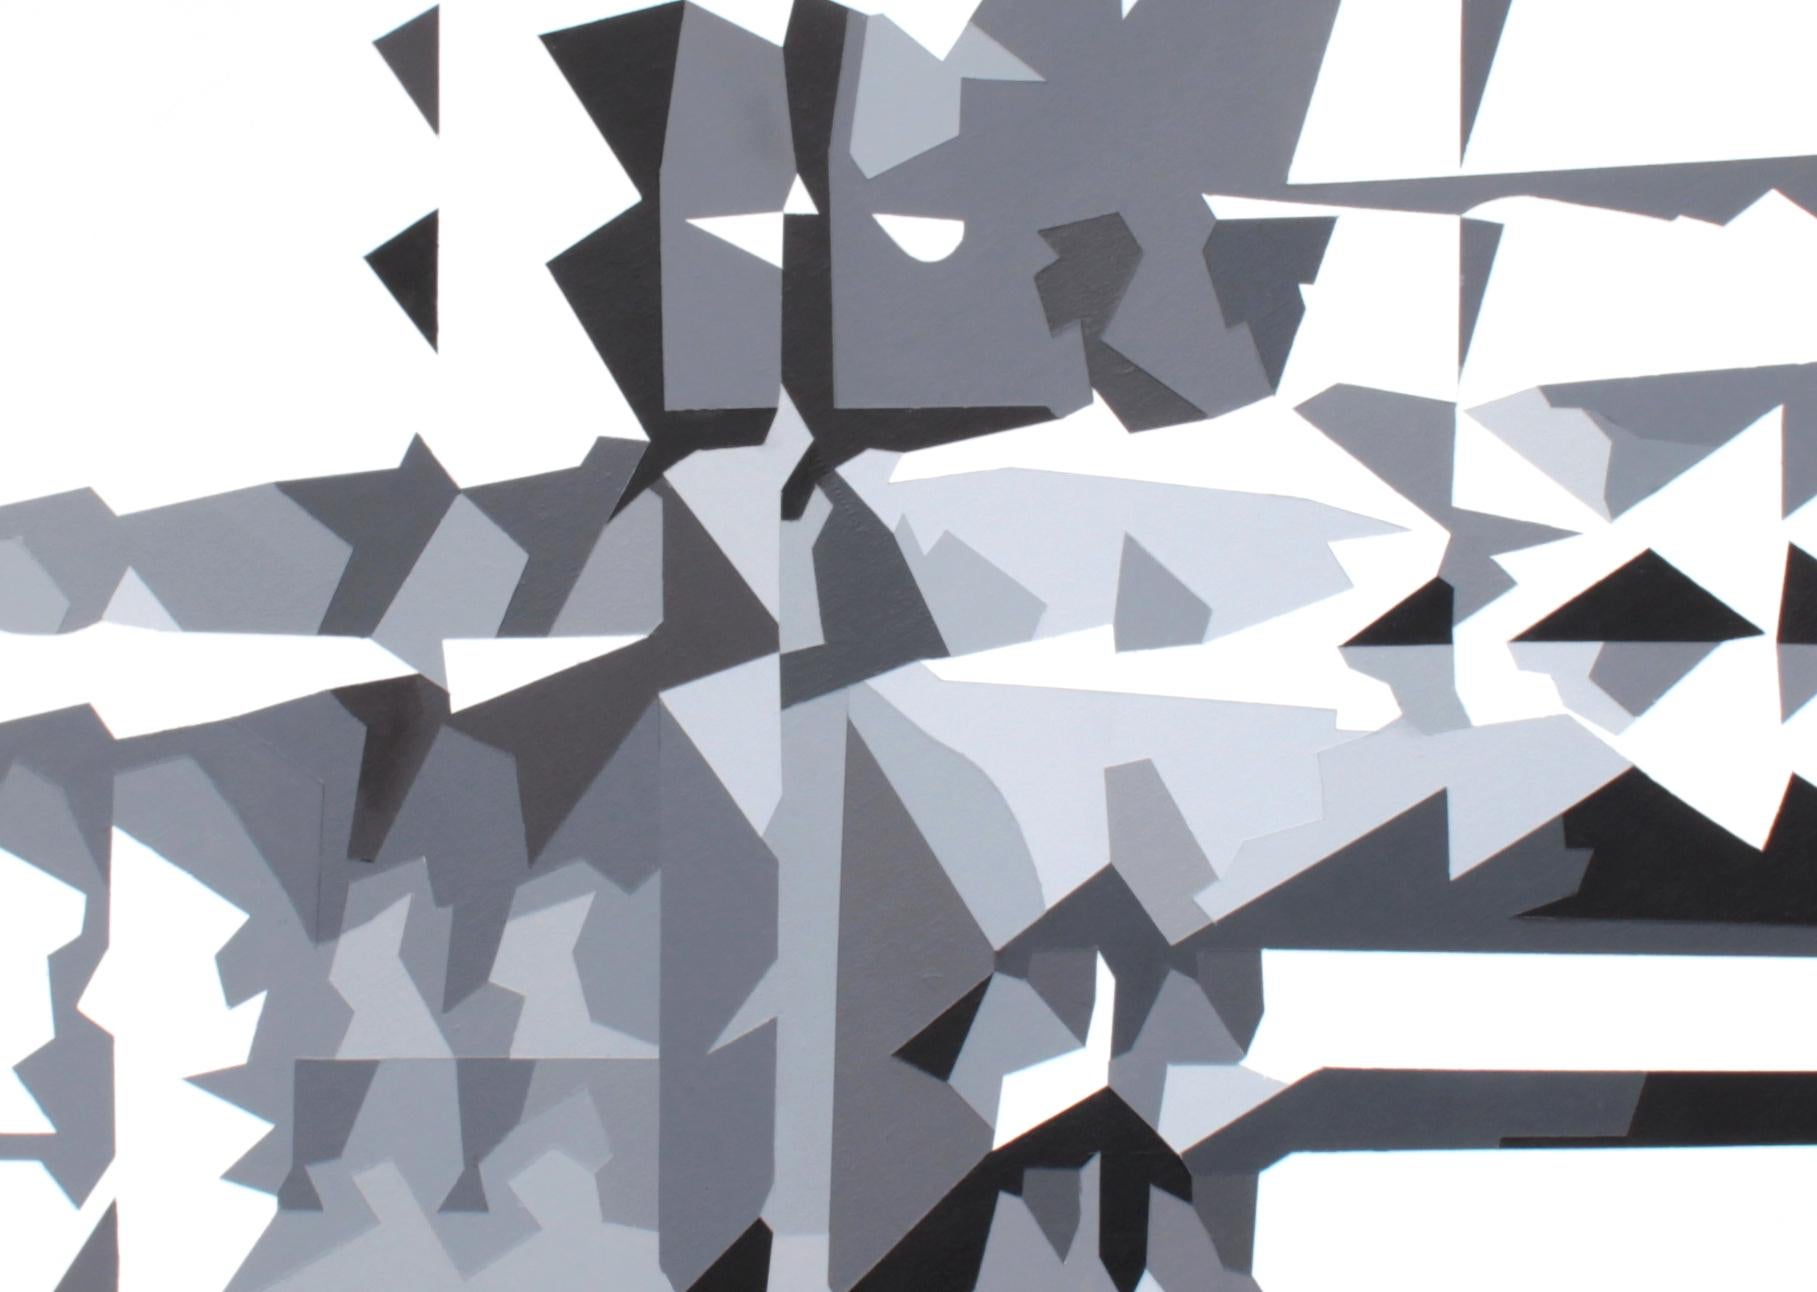 Claudia Fauth Acrylfarbe auf Leinwand „A Different View On A Polyhedron“ im Angebot 2